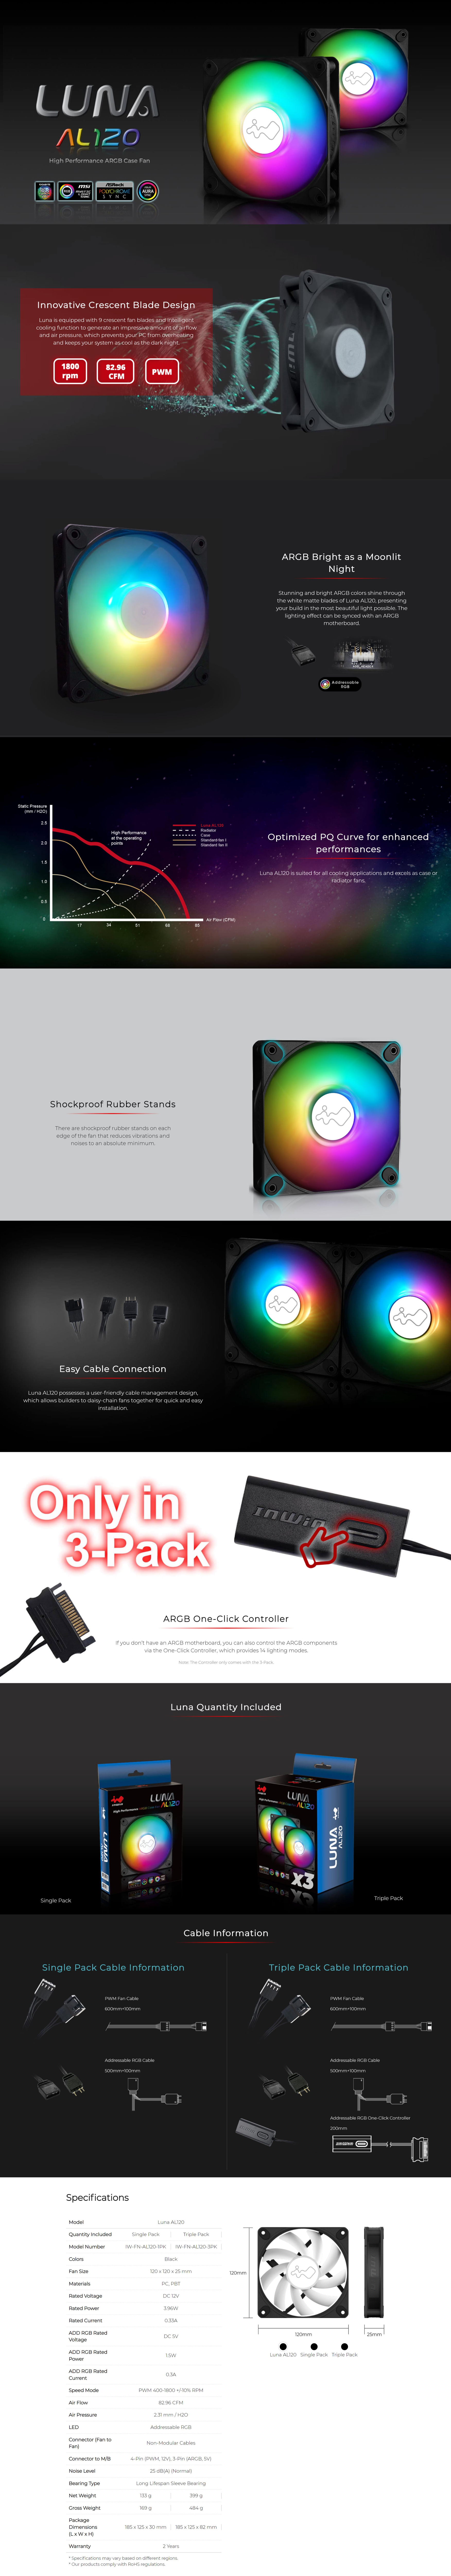 A large marketing image providing additional information about the product InWin LUNA AL120 120mm ARGB Case Fan - 3-Pack & Controller - Additional alt info not provided